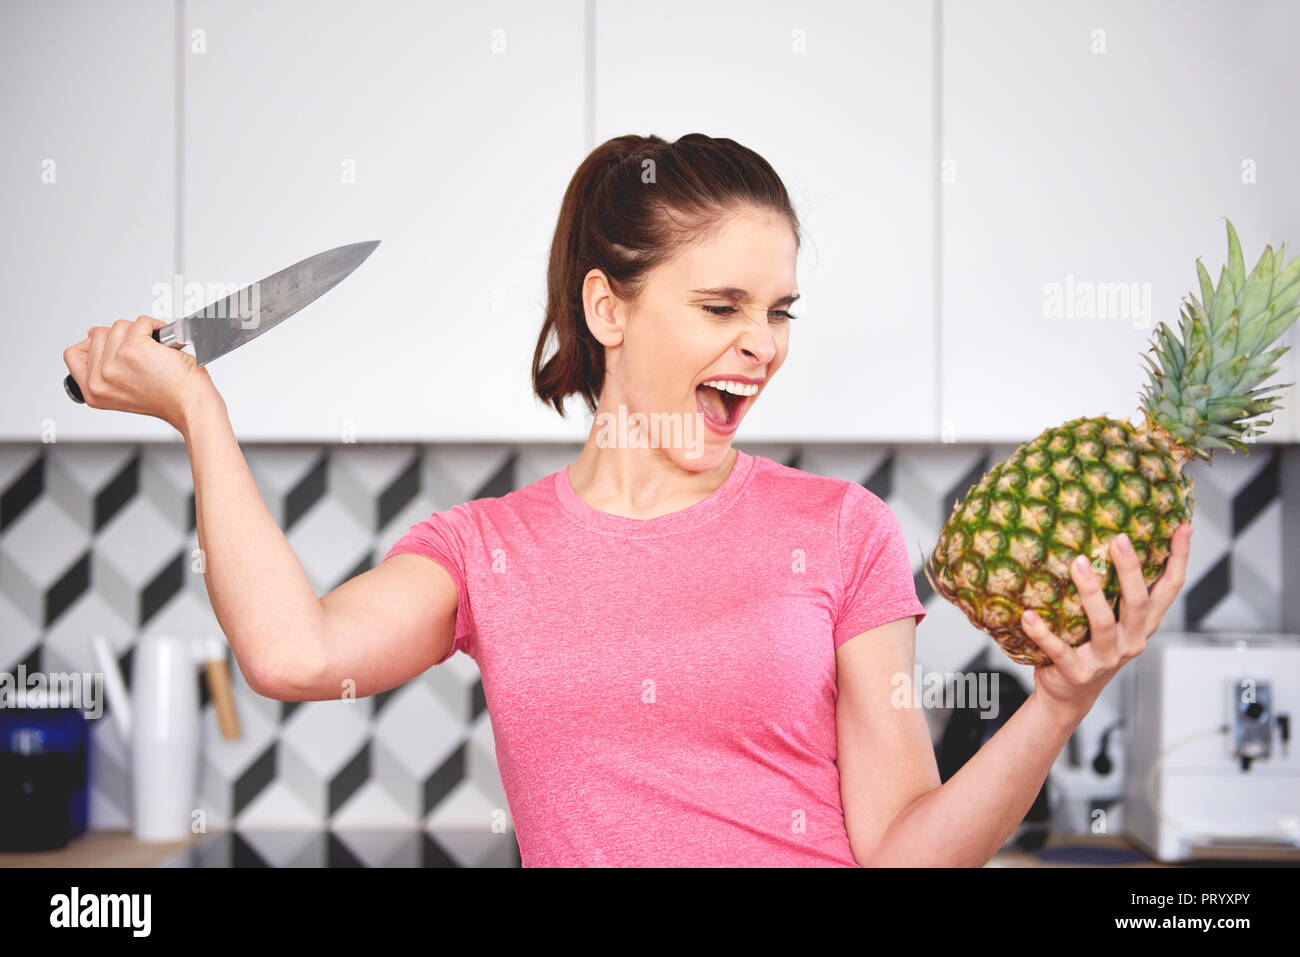 Portrait of screaming woman attacking pineapple with knife in the kitchen Stock Photo